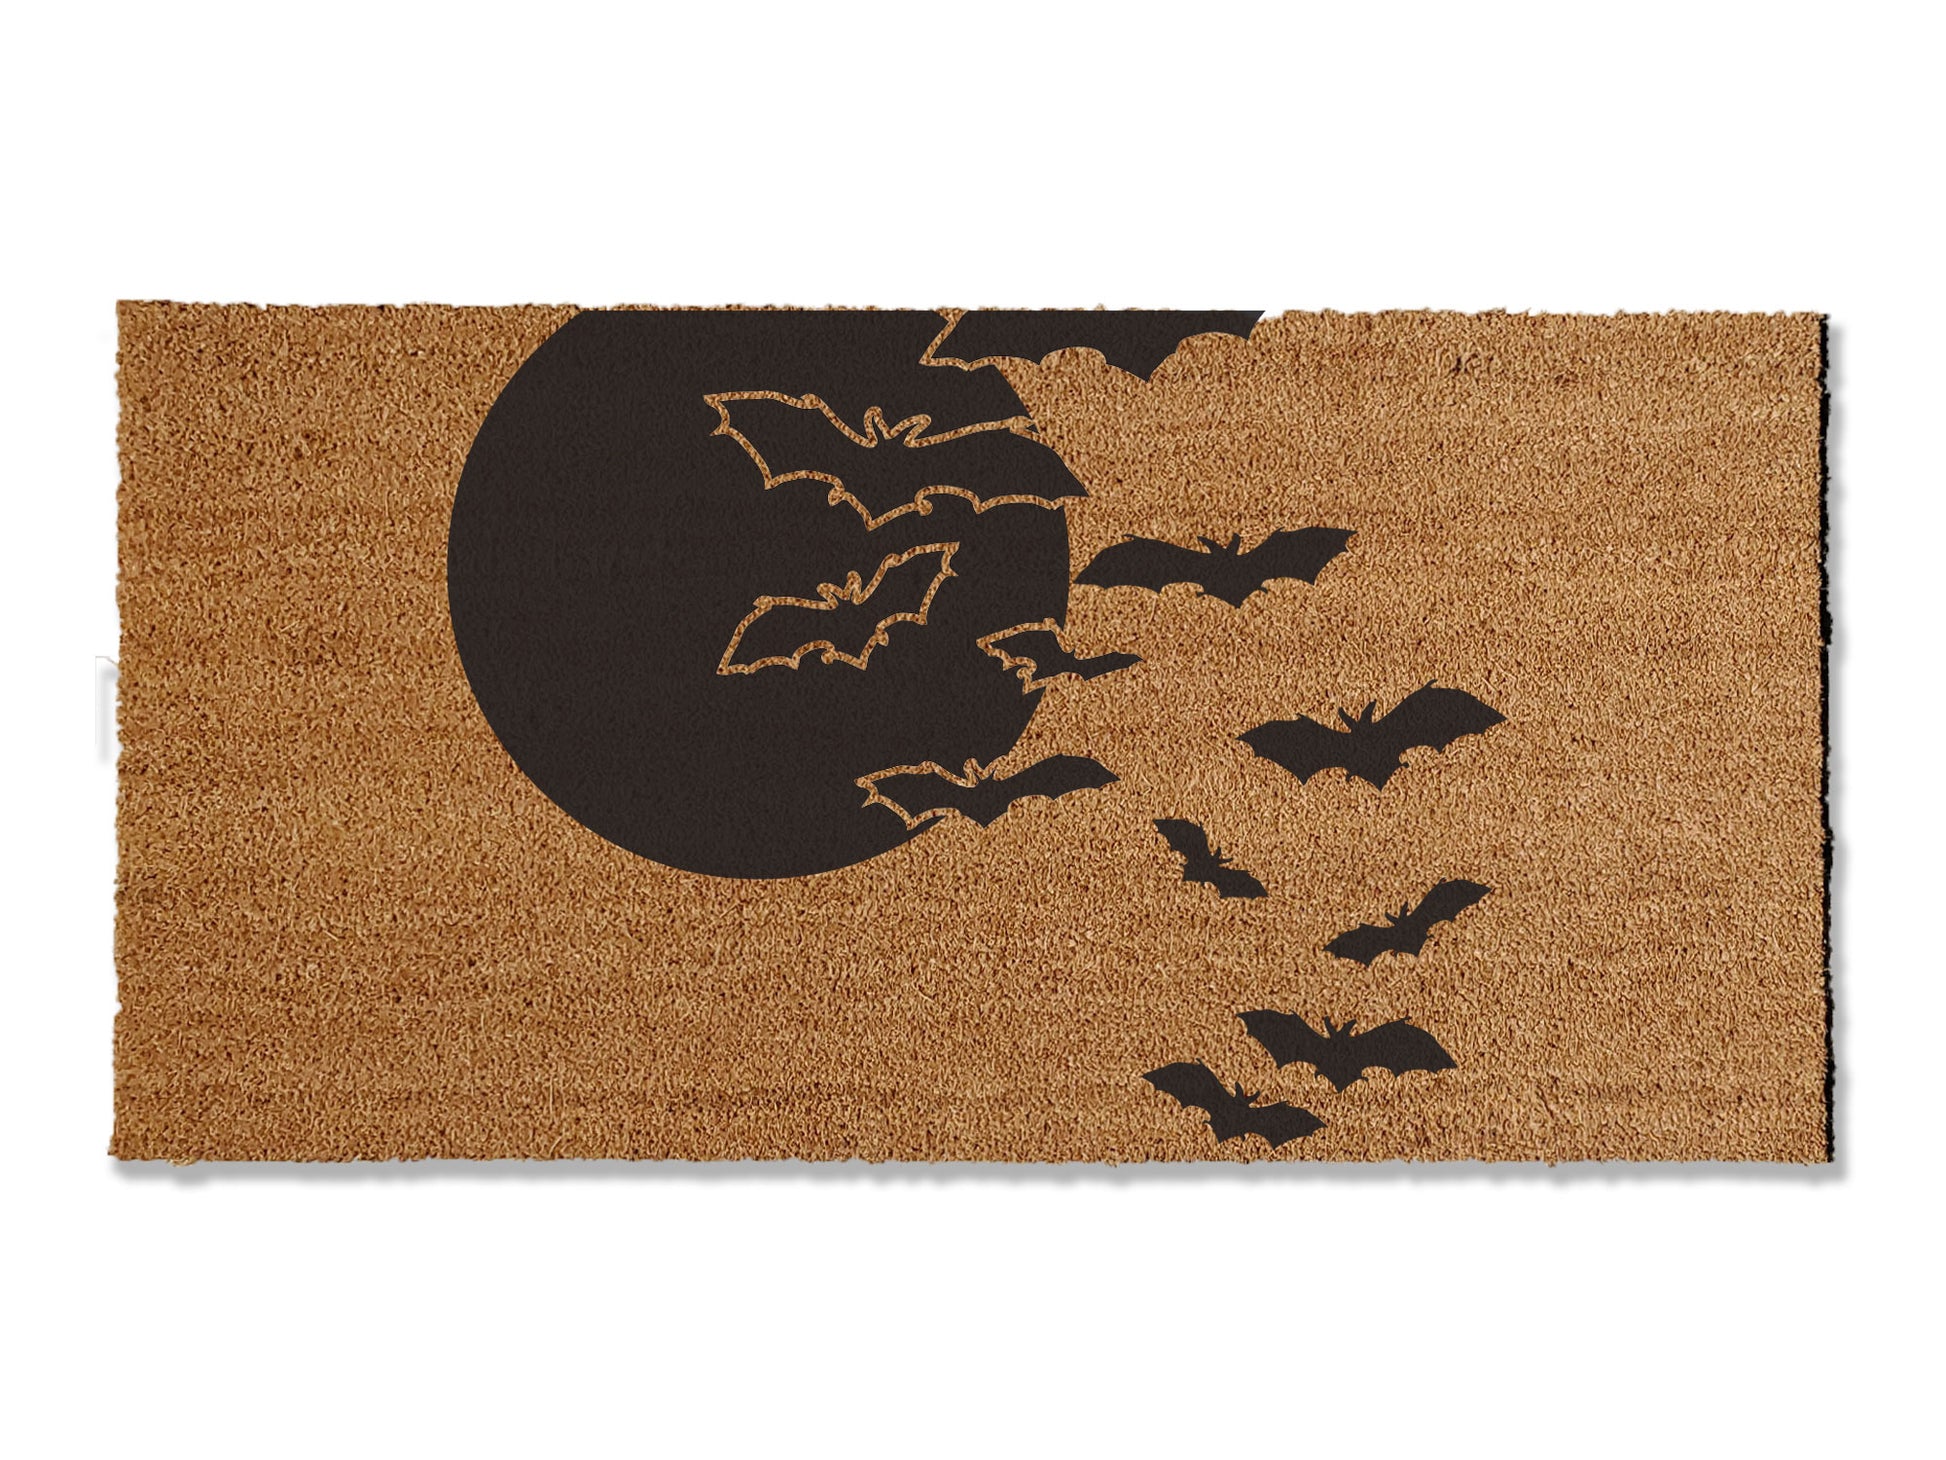 A coir doormat that is 24 inches by 36 inches and has a colony of bats flying towards a full moon painted on it.